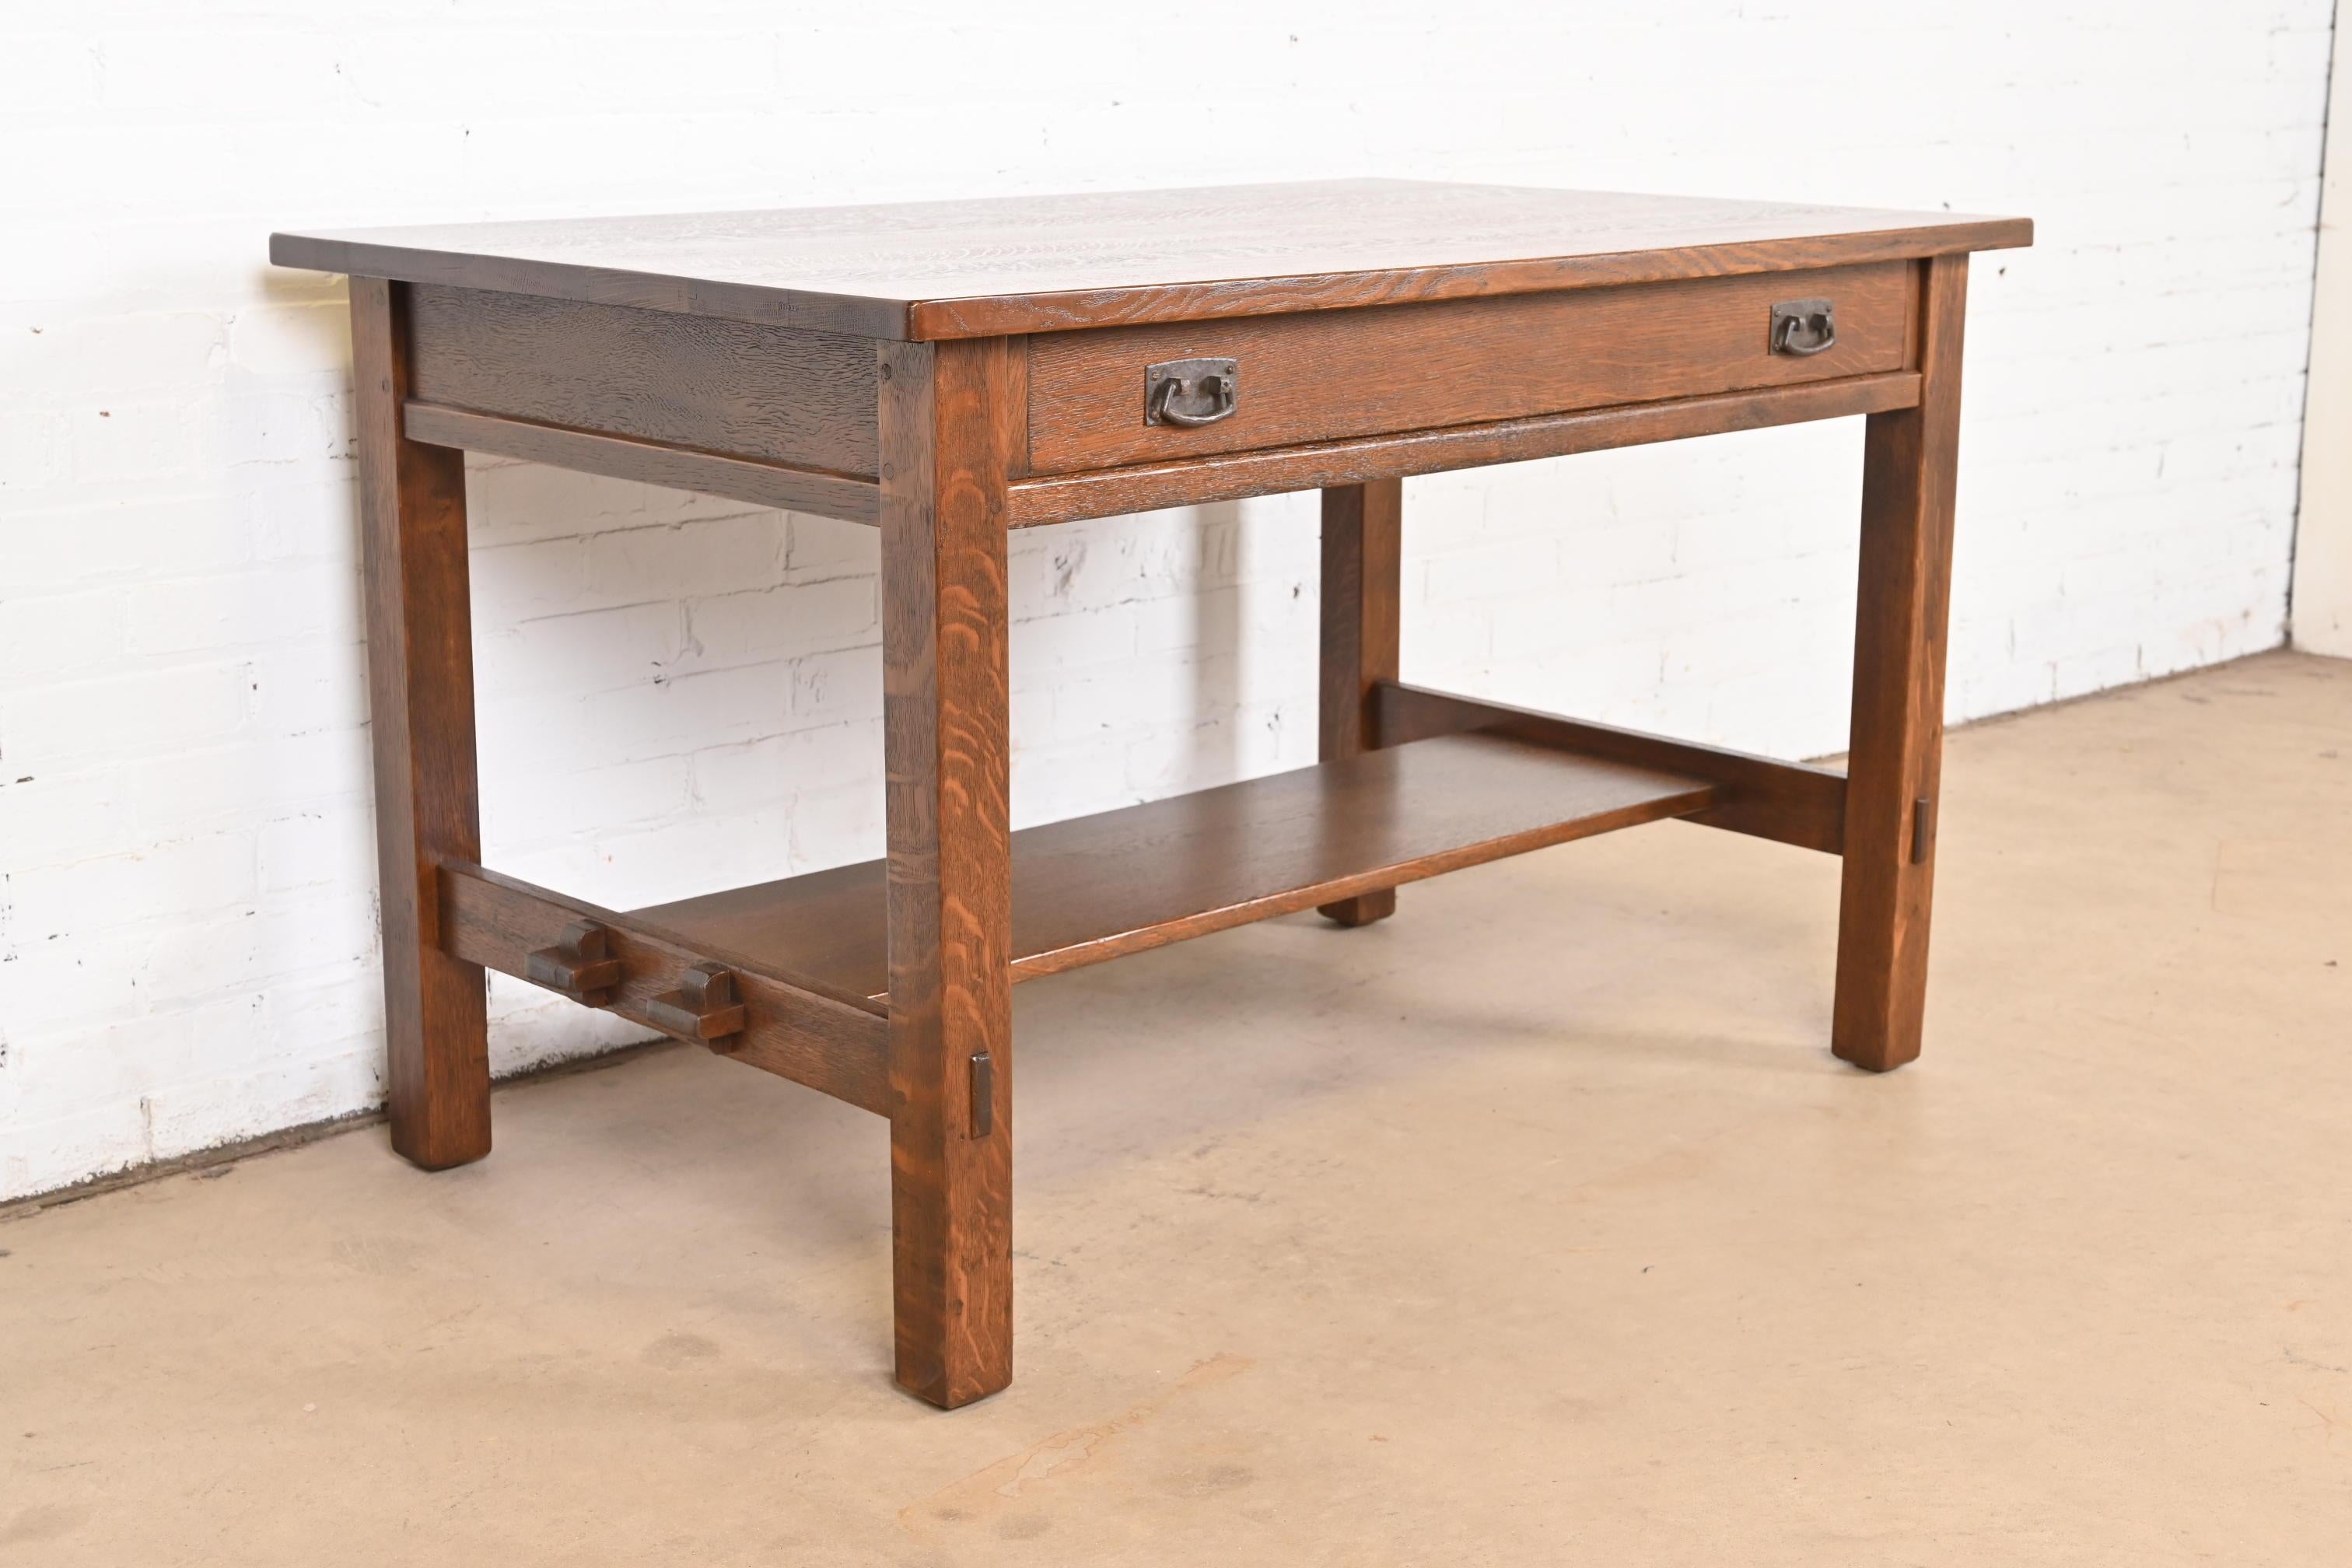 An exceptional antique Mission or Arts & Crafts writing desk or library table

By L. & J.G. Stickley

USA, Circa 1900

Solid quarter sawn oak, with original hammered copper hardware.

Measures: 48